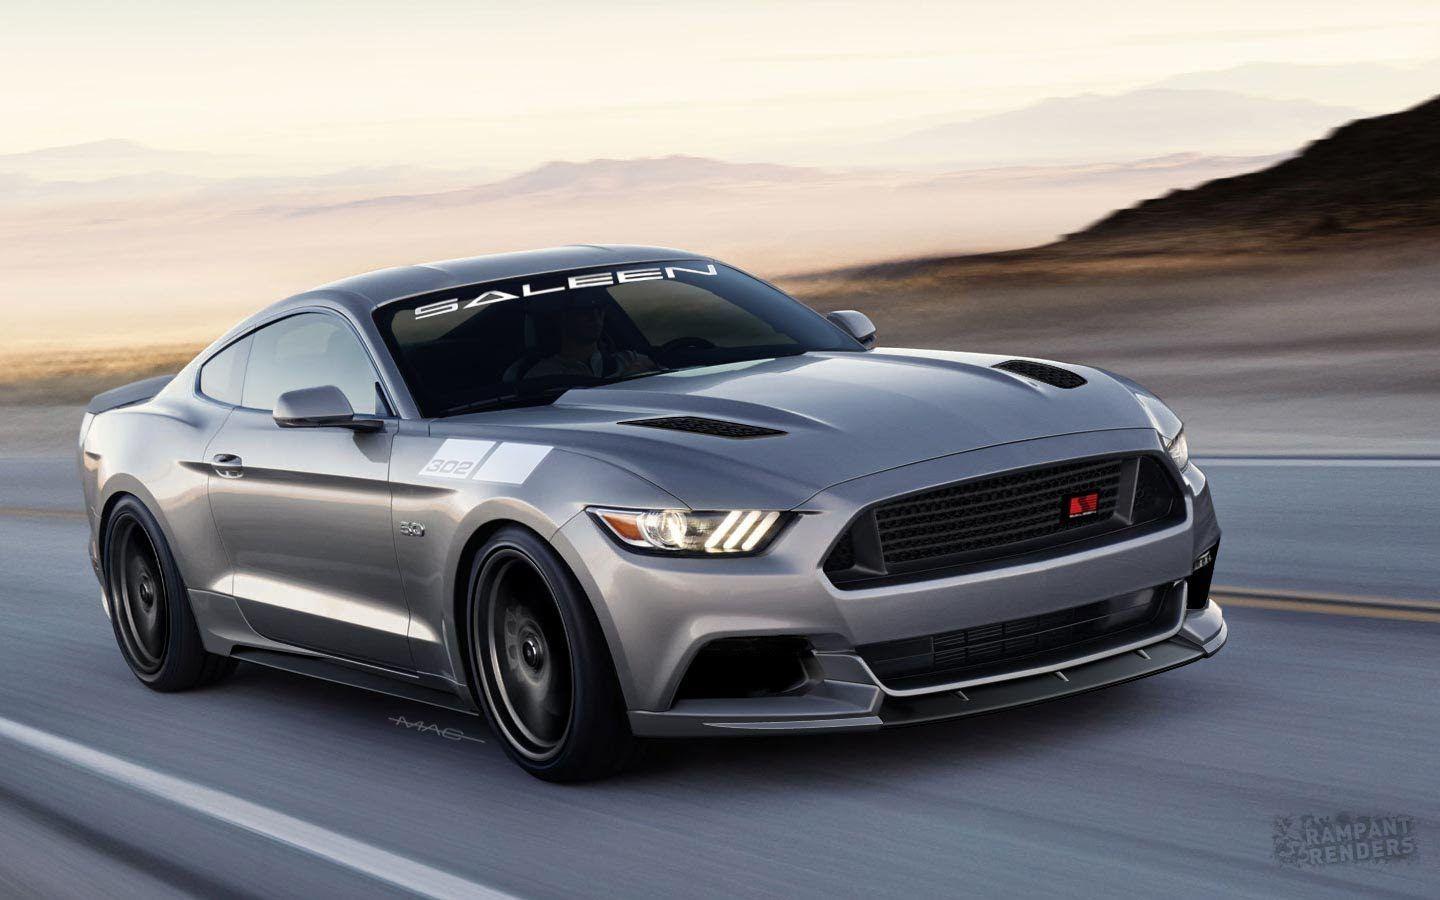 The 2015 Ford Mustang GT in Wimbledon White